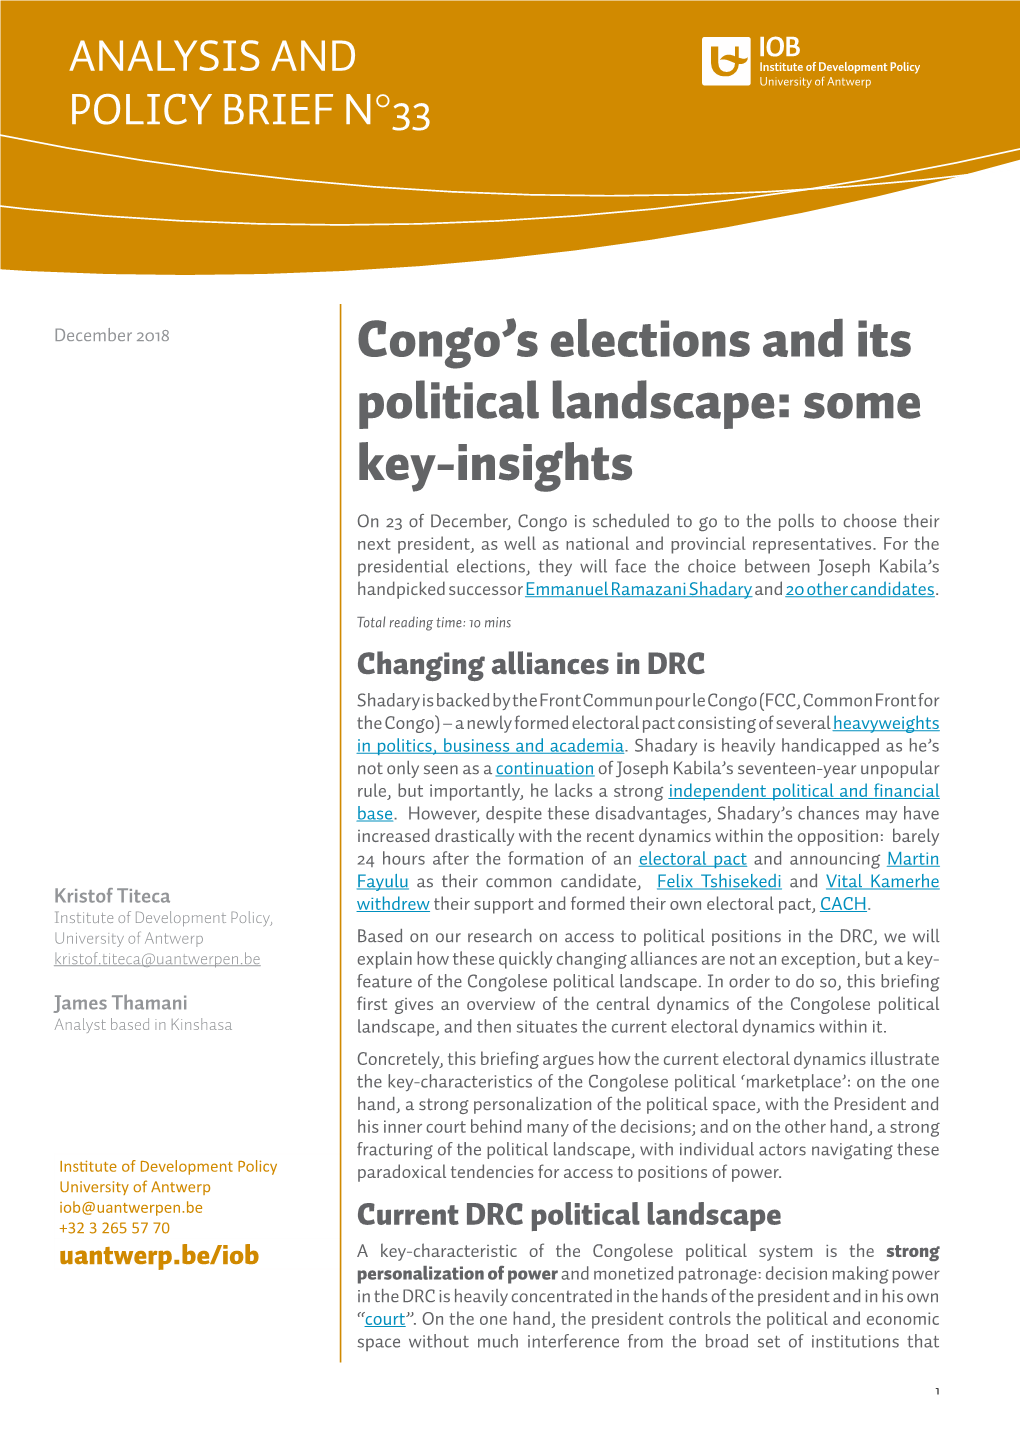 Congo's Elections and Its Political Landscape: Some Key-Insights